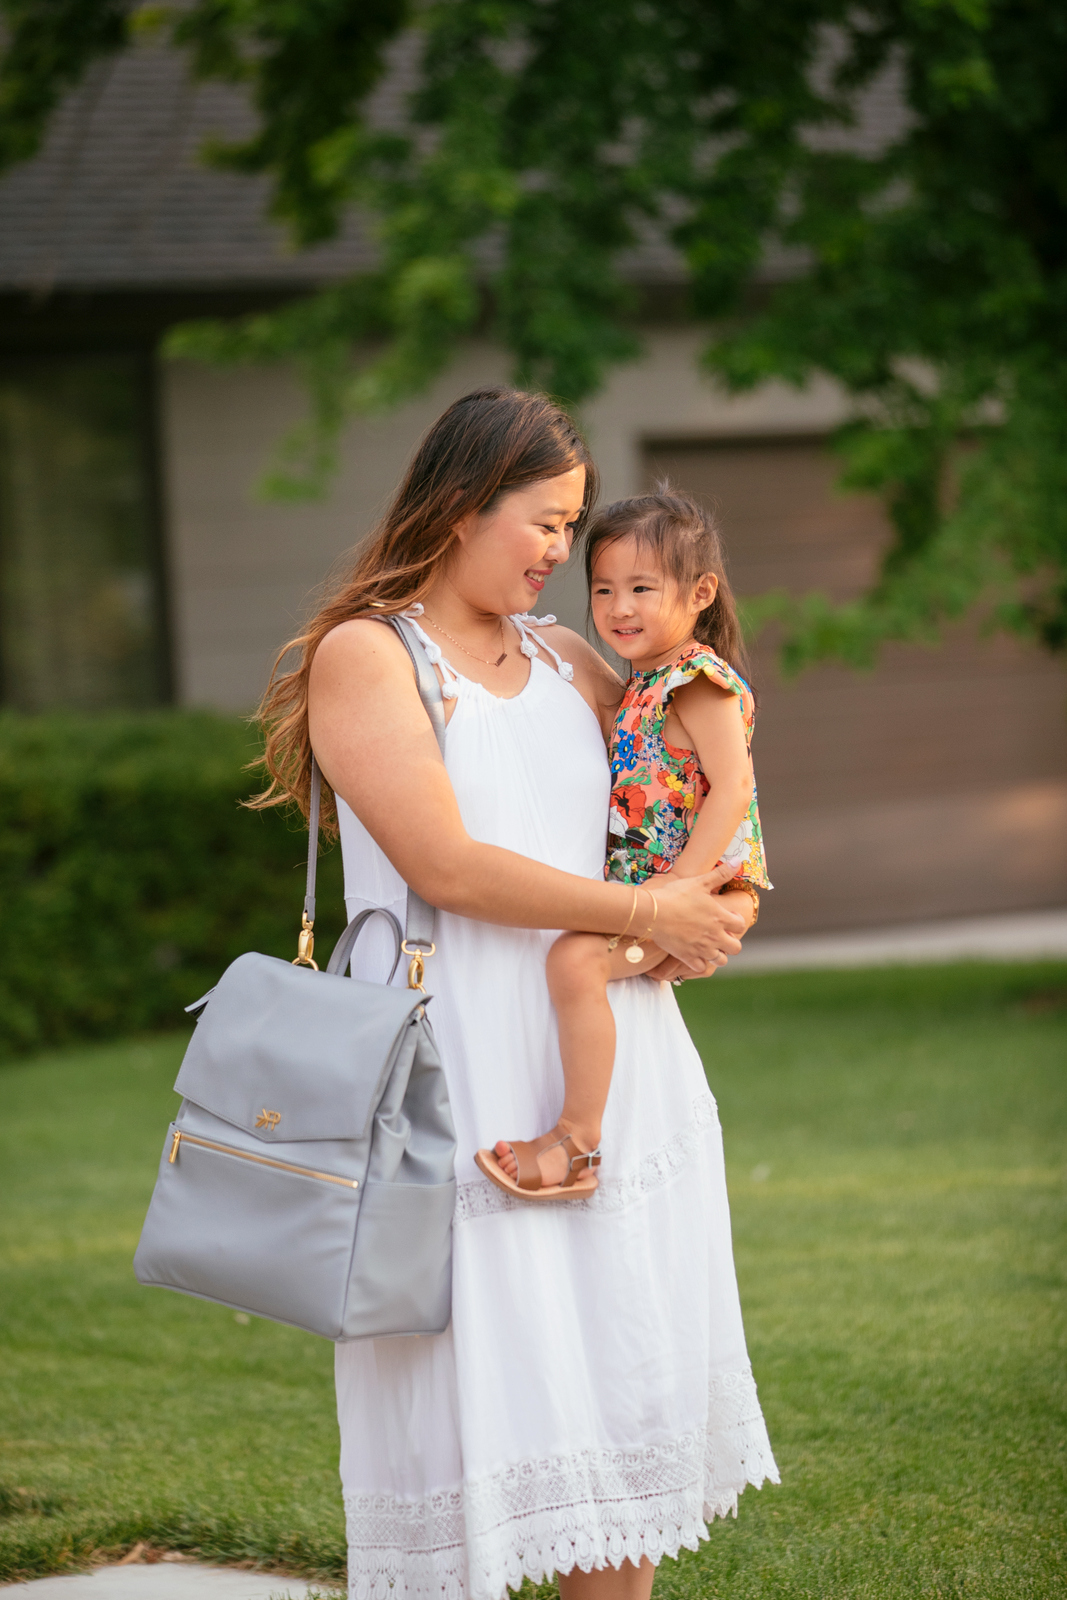 Fantastic Family Photos Ideas Ft. The Cutest Diaper Bag From Freshly Picked by Utah blogger Sandy A La Mode